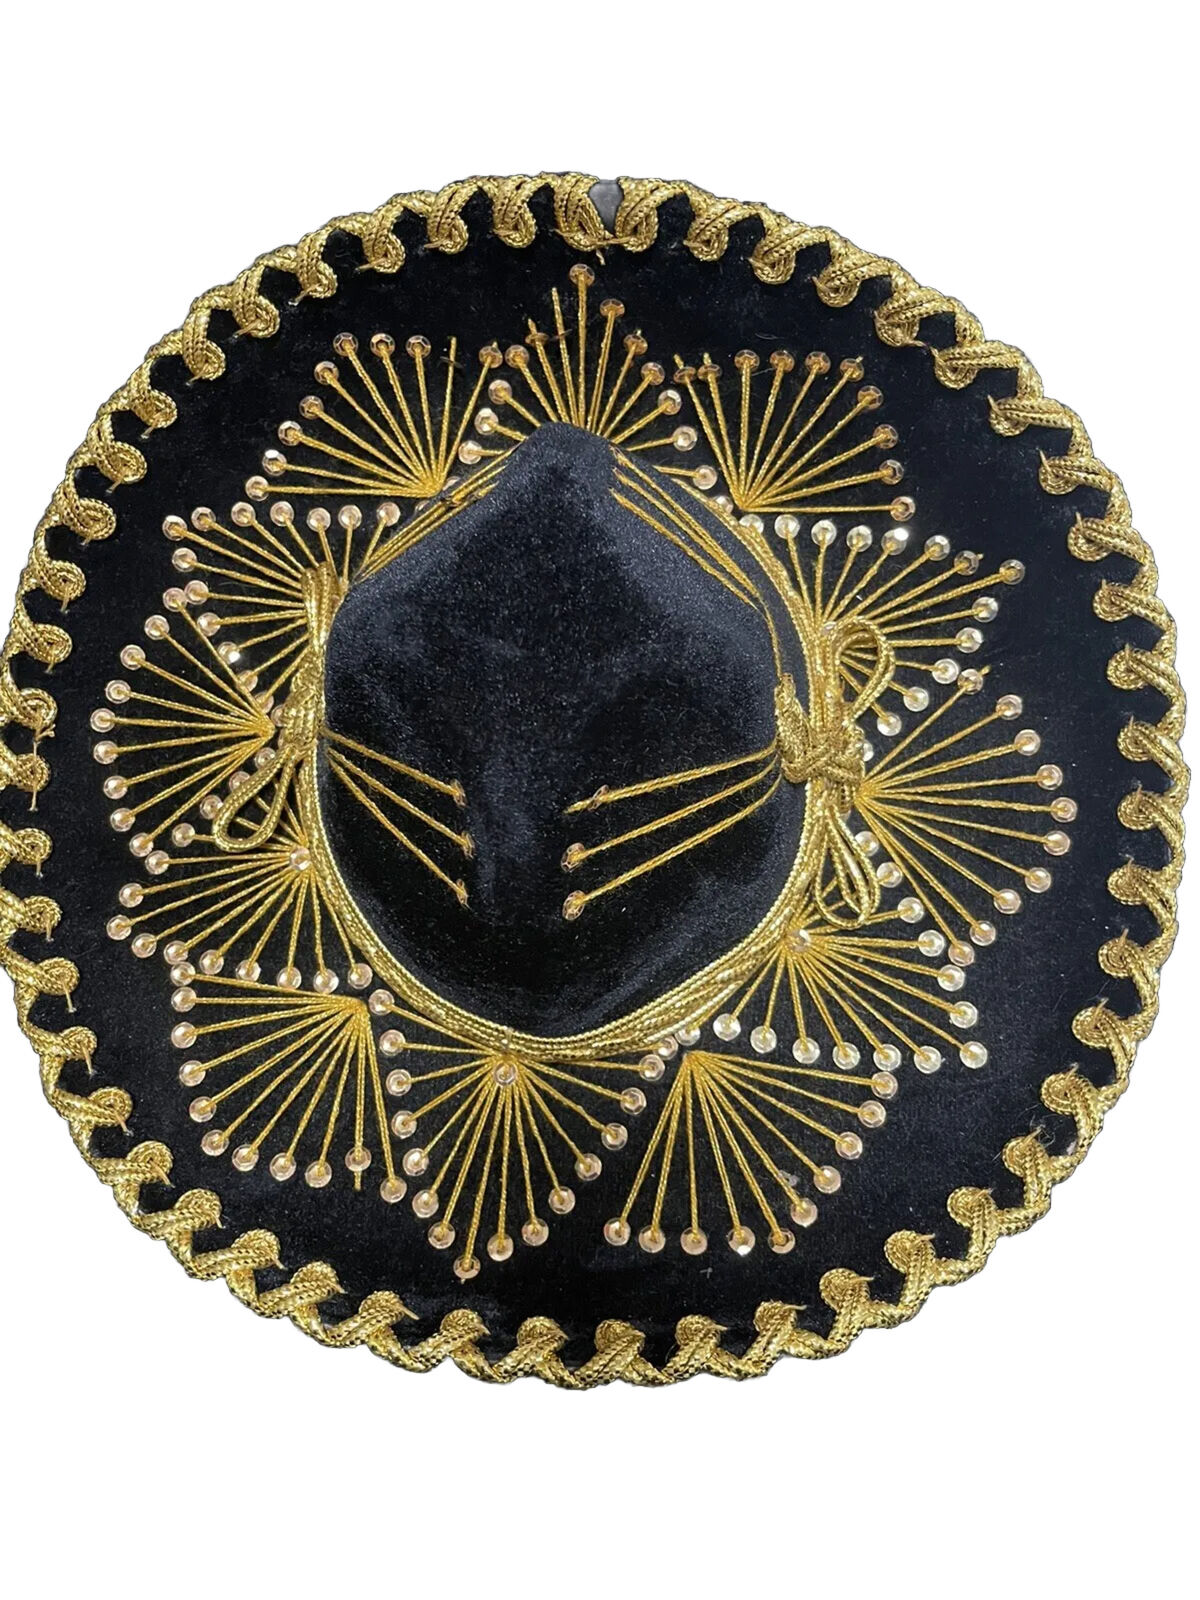 Salazar Yepez Black and Gold Authentic Mexican Sombrero 20 1/2” On Inside Rim